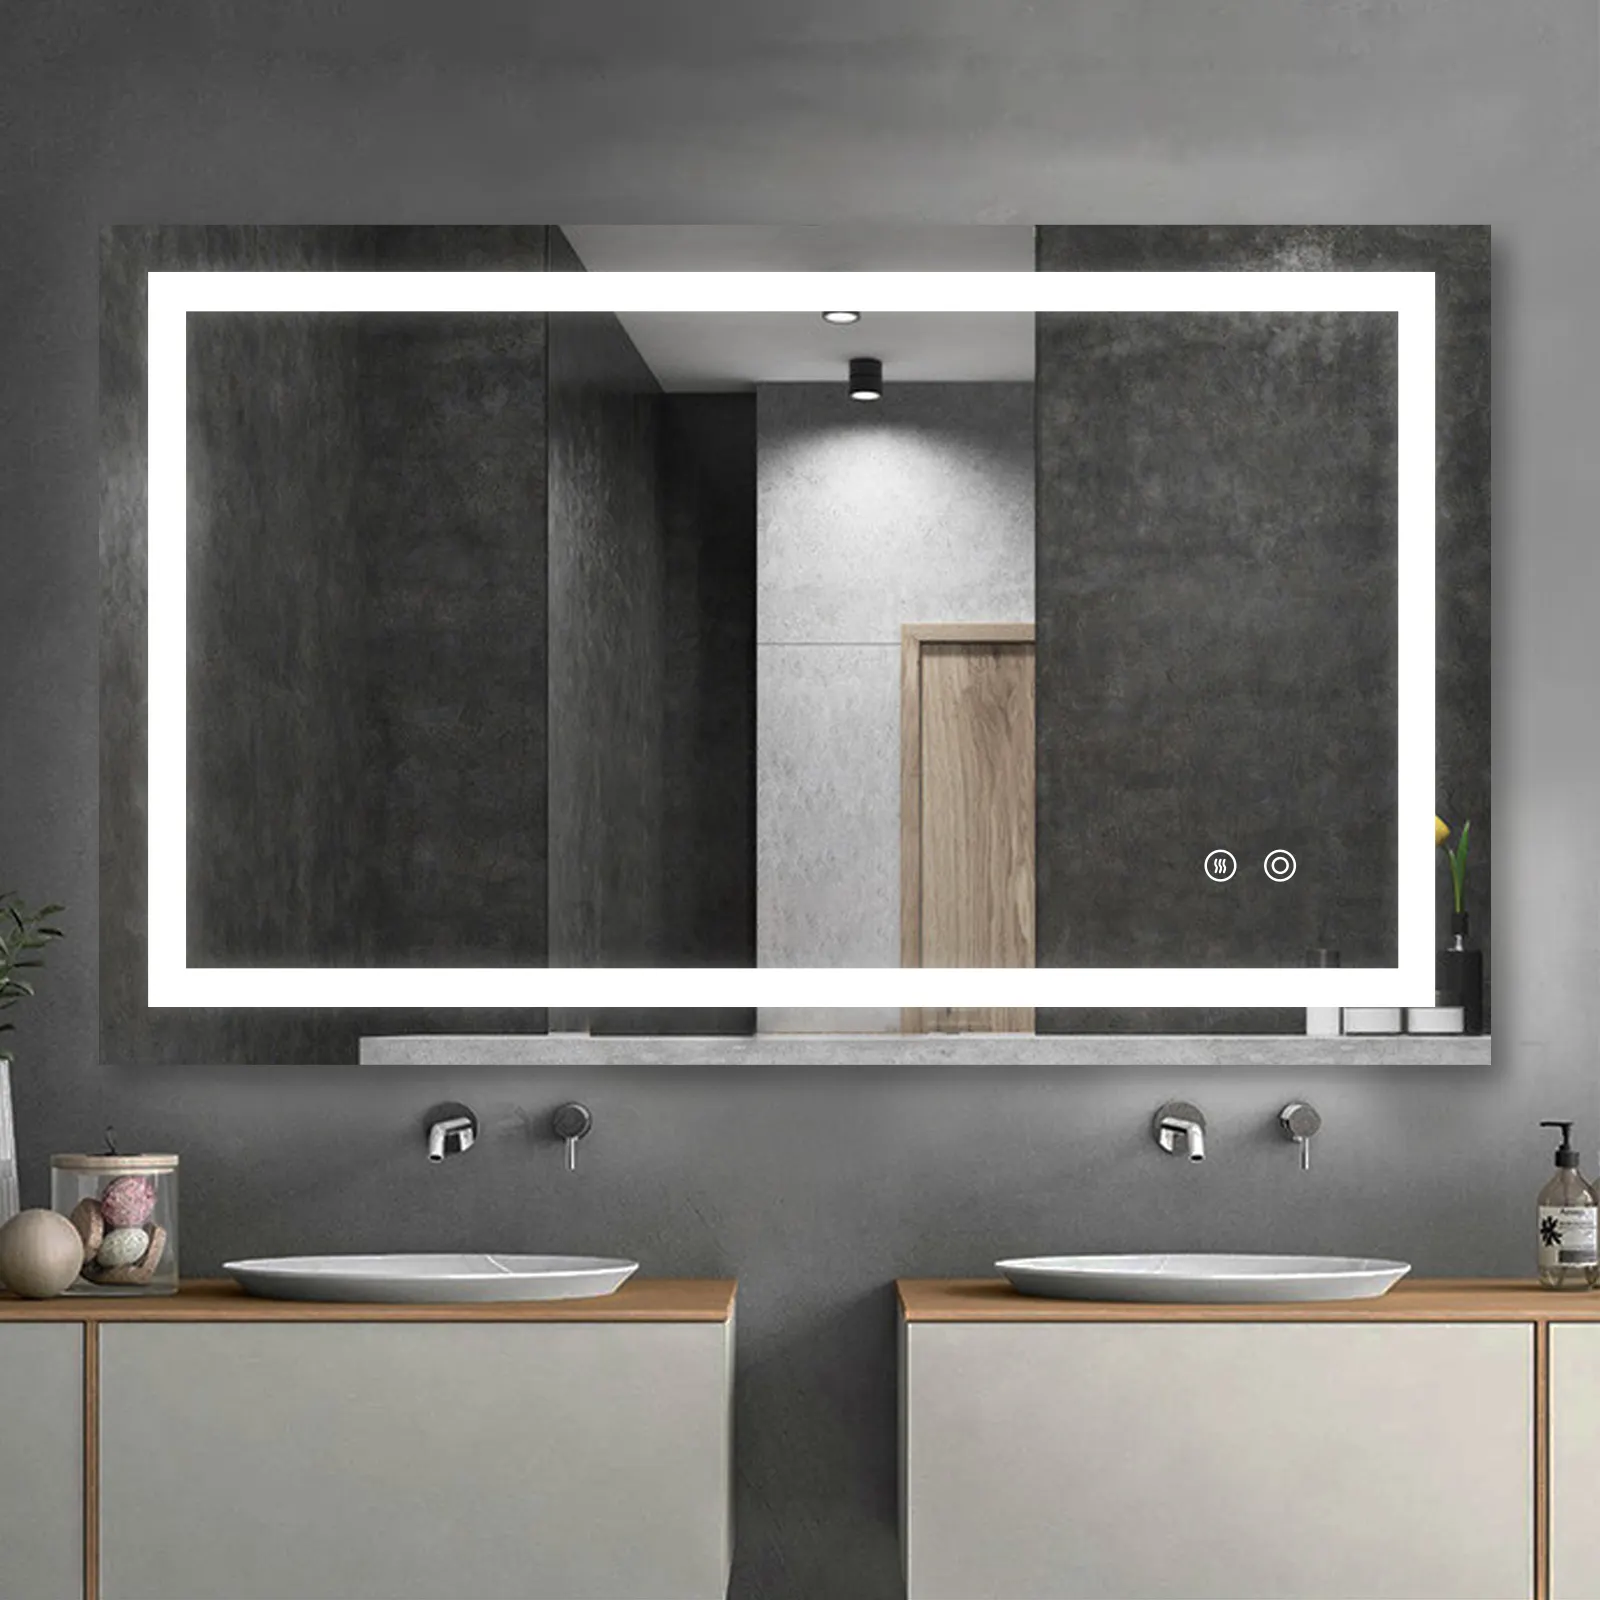 Luxury LED Bathroom Lighted Mirror for five star Hotel